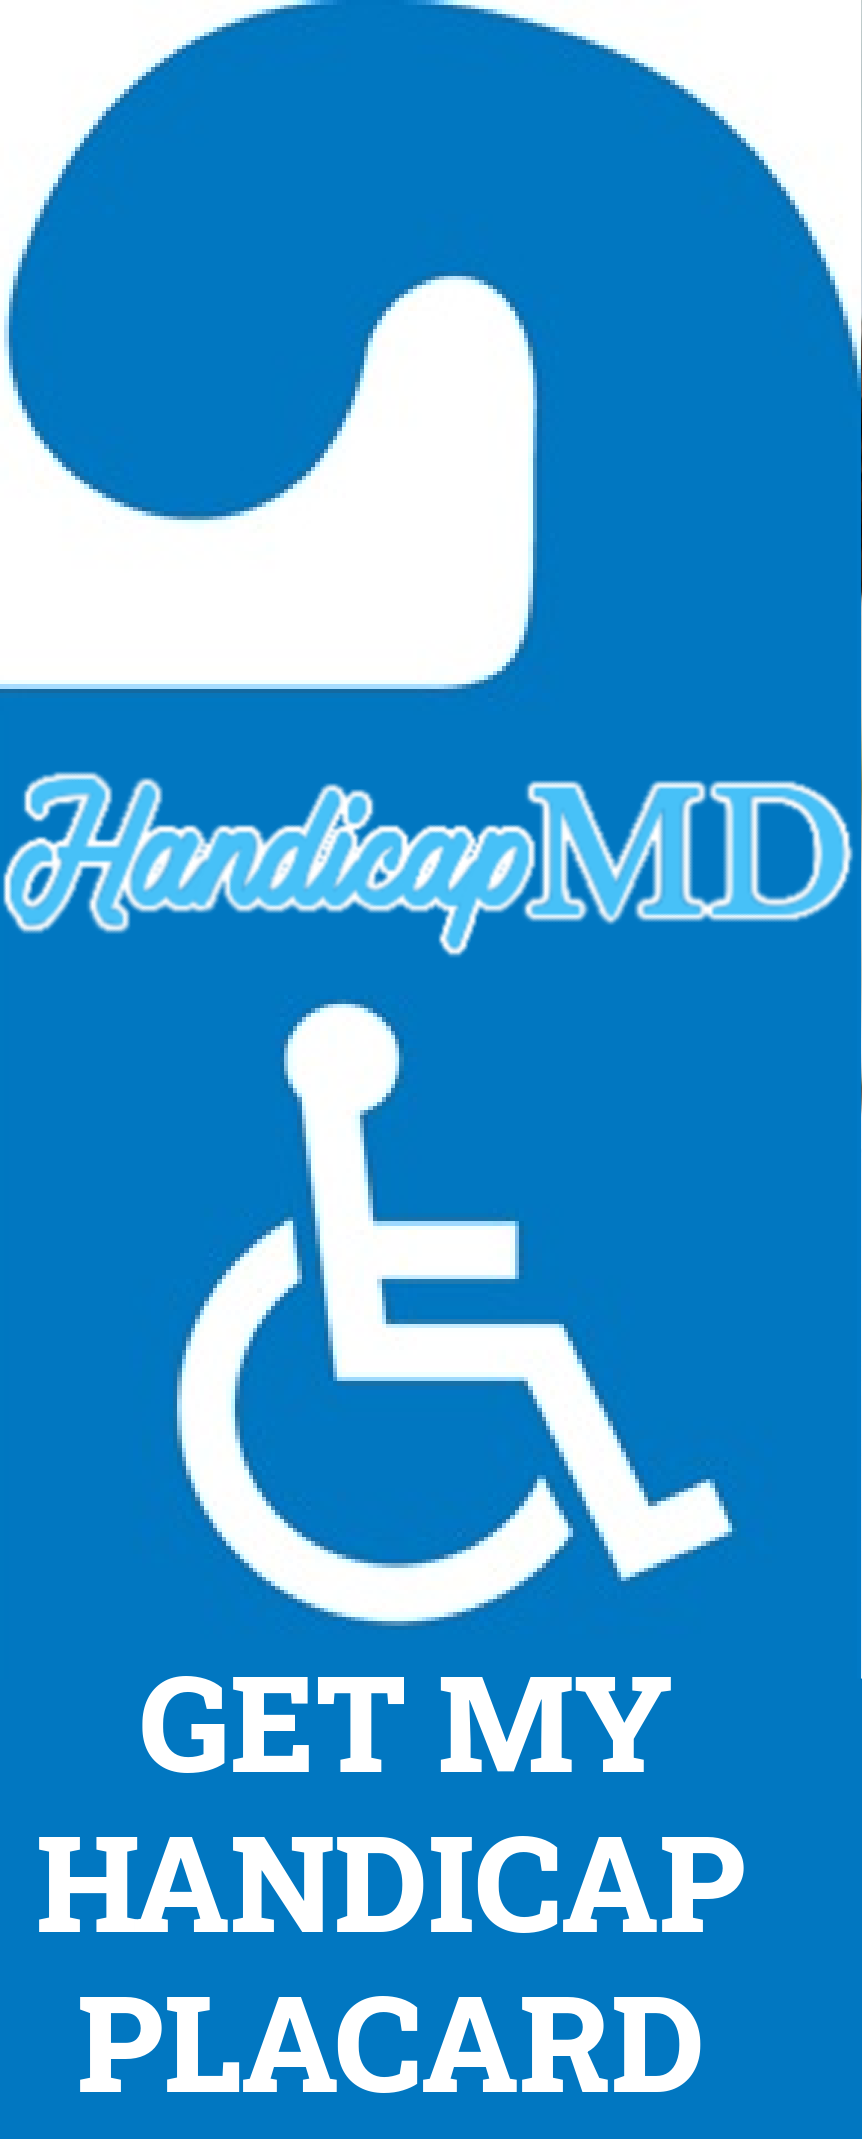 How to Replace a Lost or Stolen Handicap Placard in Florida